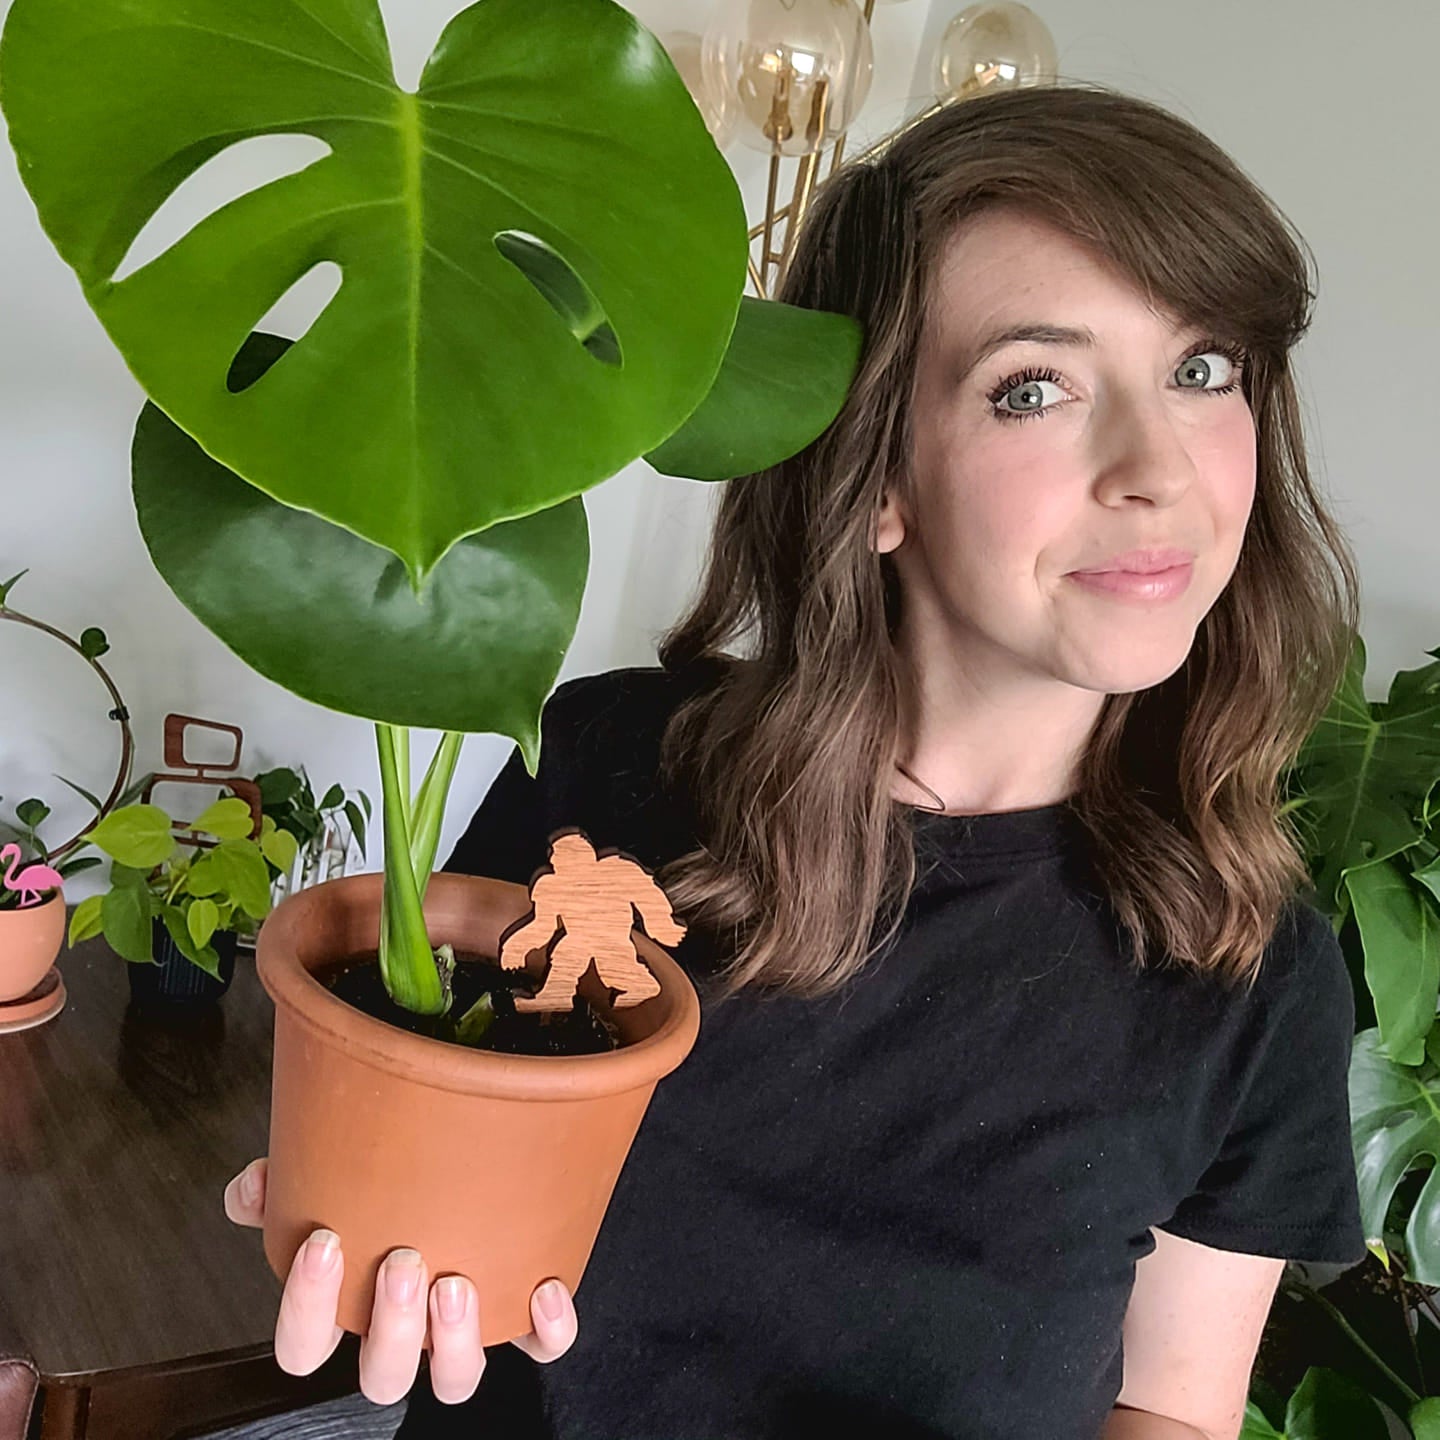 Jessy holding a small monstera plant in a clay pot with a bigfoot plant stake.